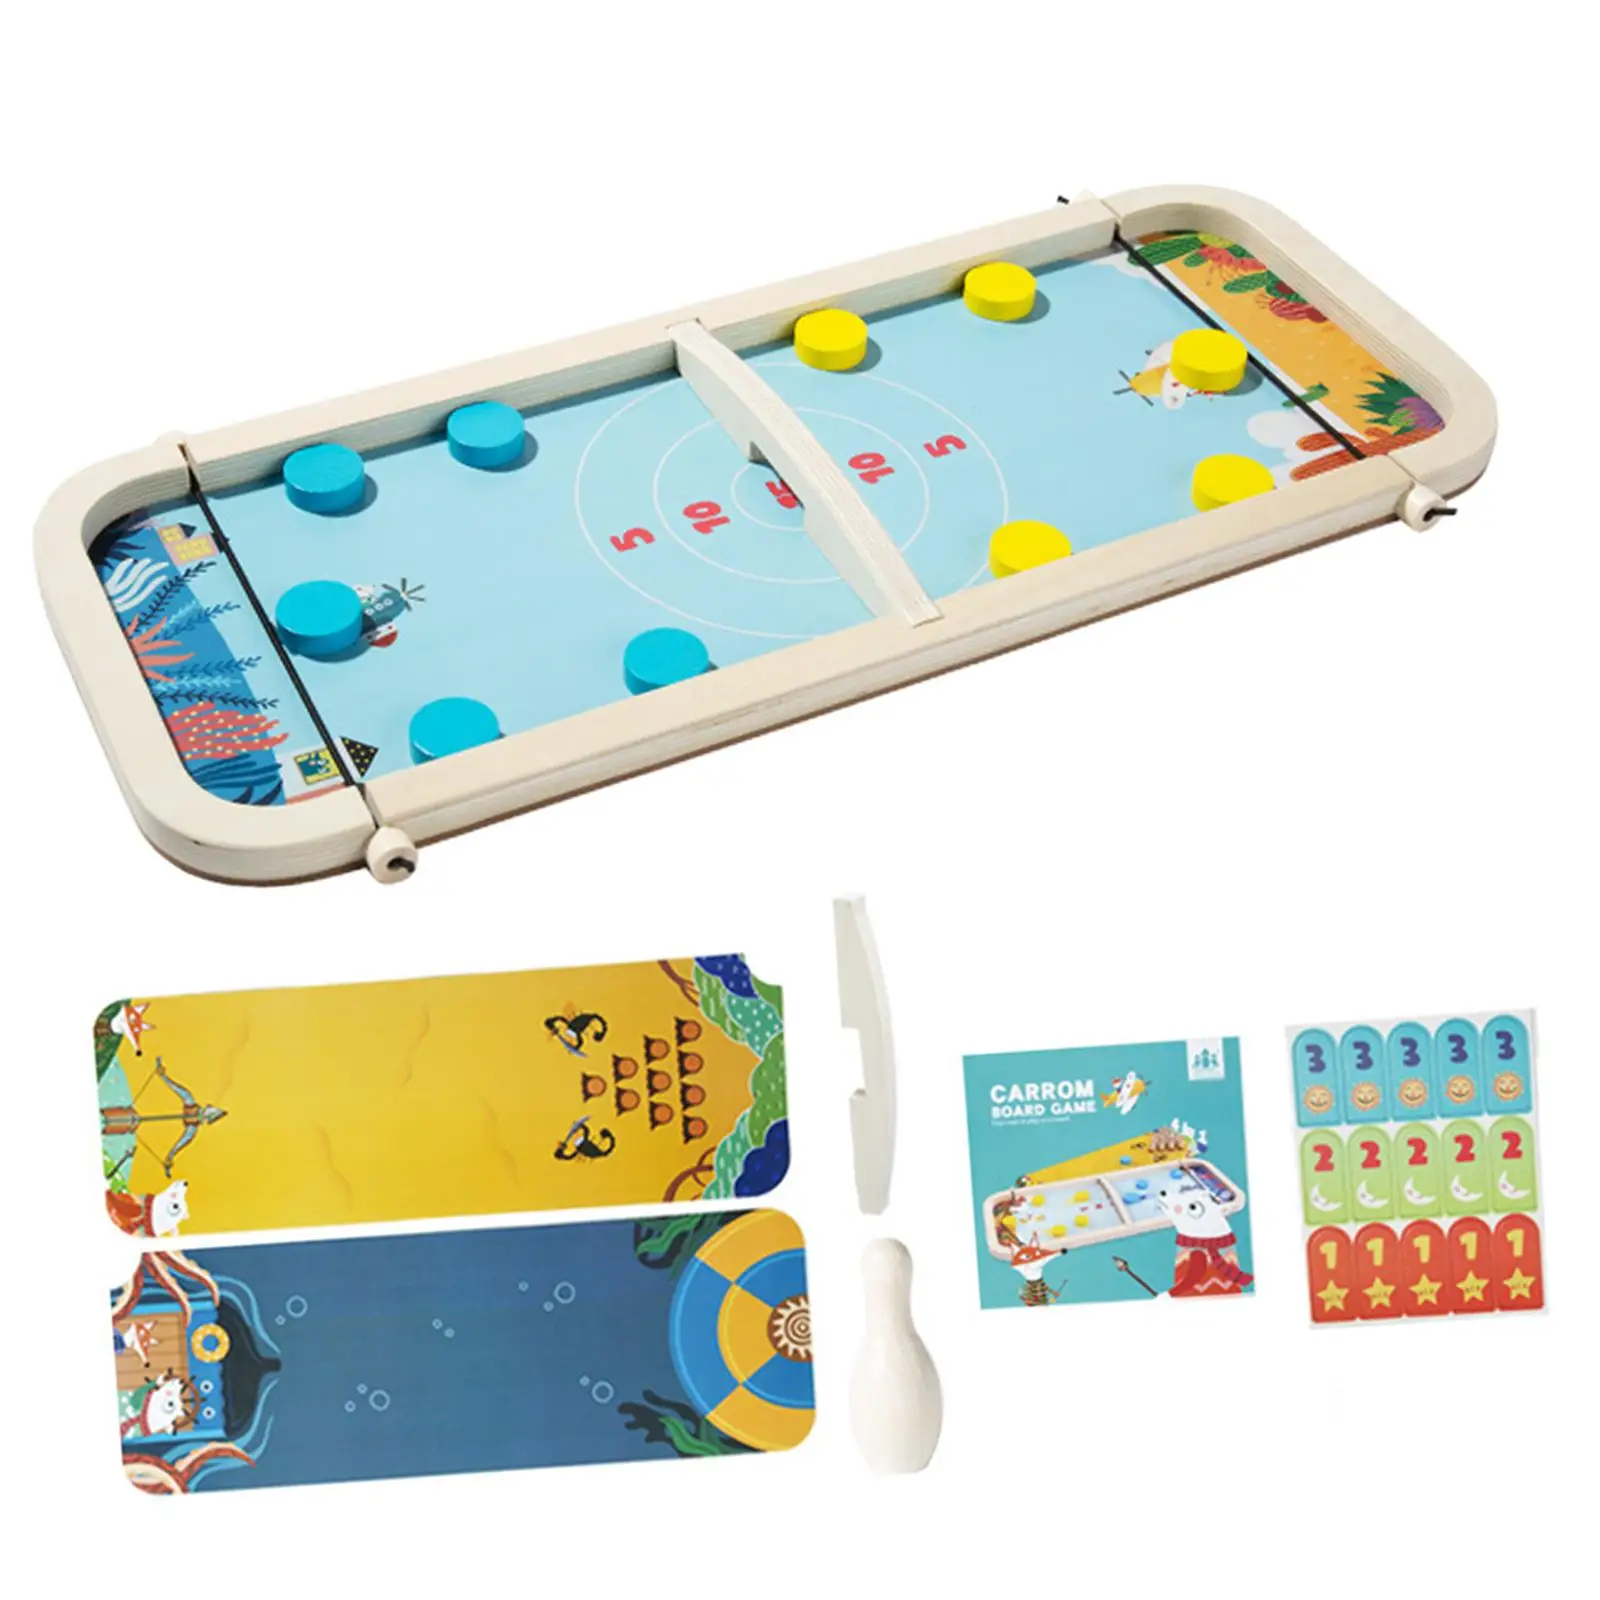 Puck Game Sport Board Game Paced Football Slingshot Game Desktop Battle Interactive Toy Foosball Winner Game for Family Game